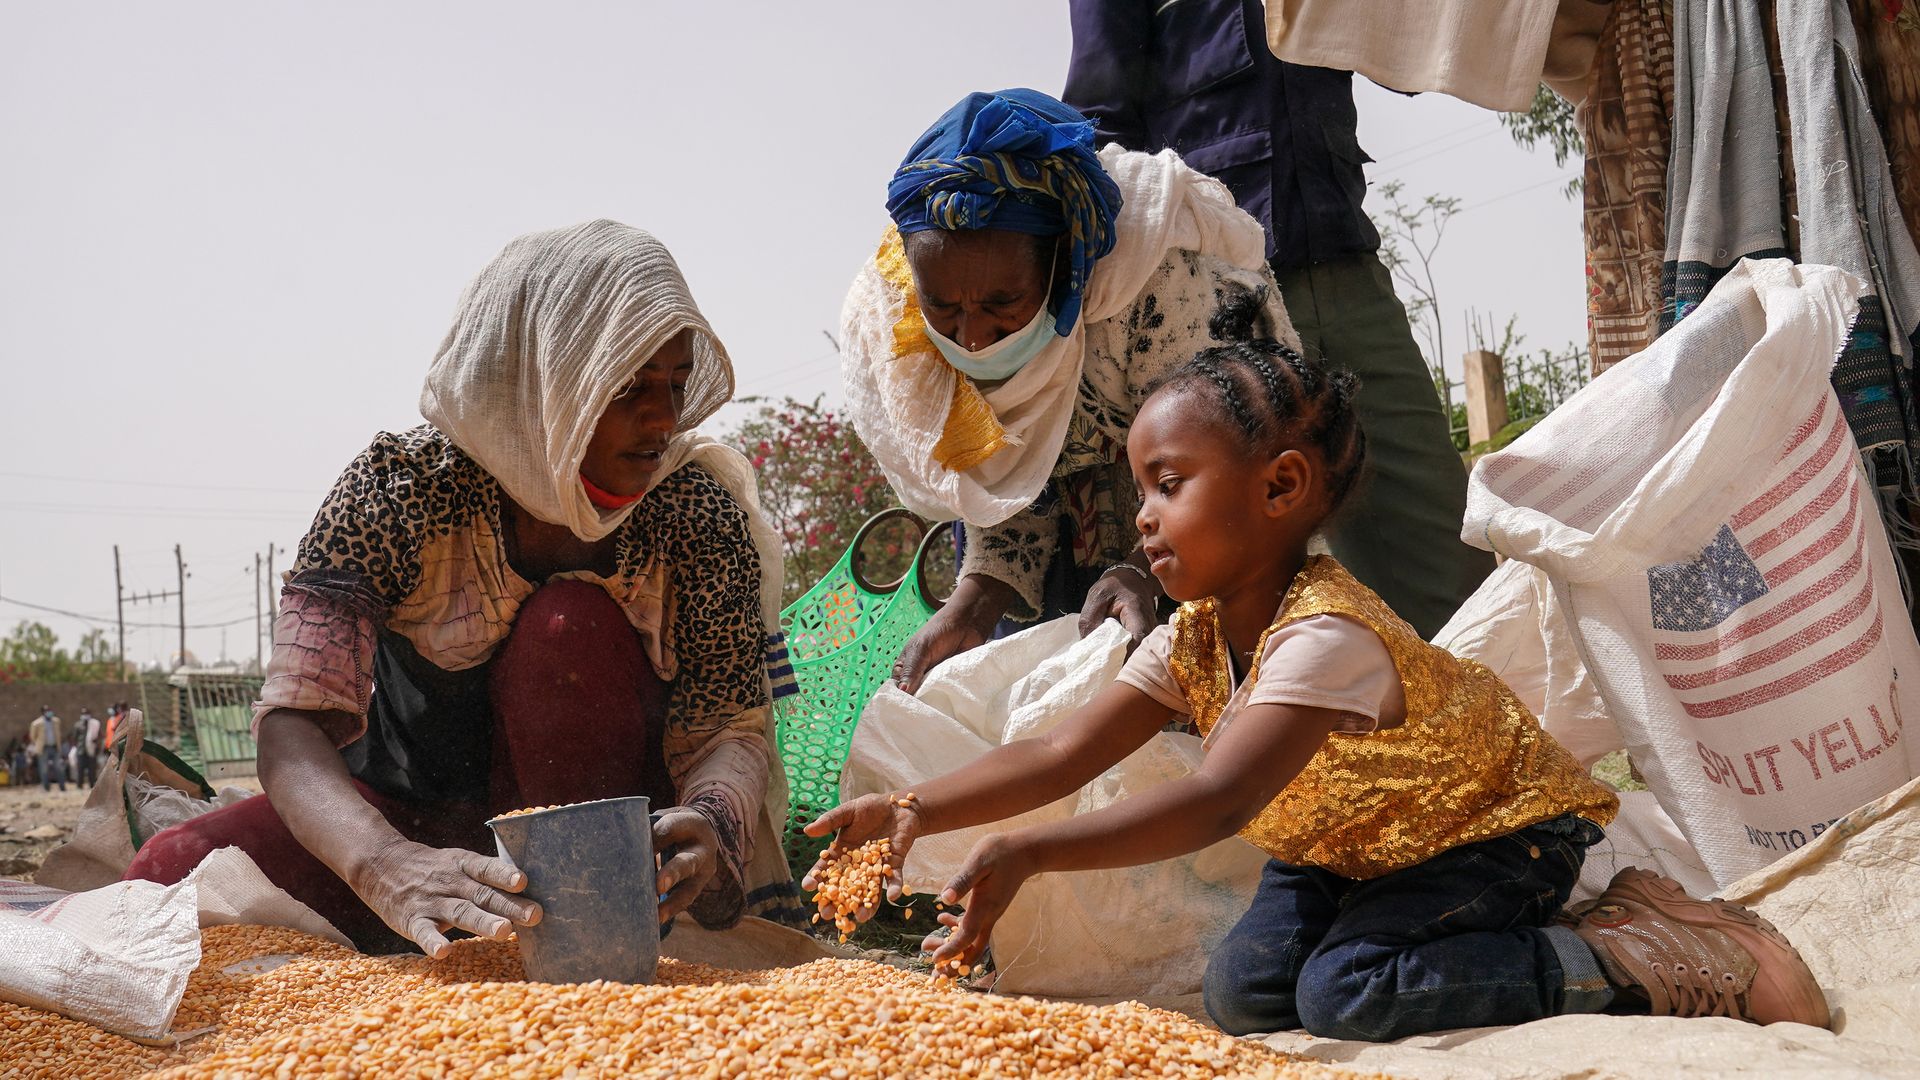 An aid worker distributes measured portions of yellow lentils to residents of Geha subcity at an aid operation run by USAID, Catholic Relief Services and the Relief Society of Tigray on June 16, 2021